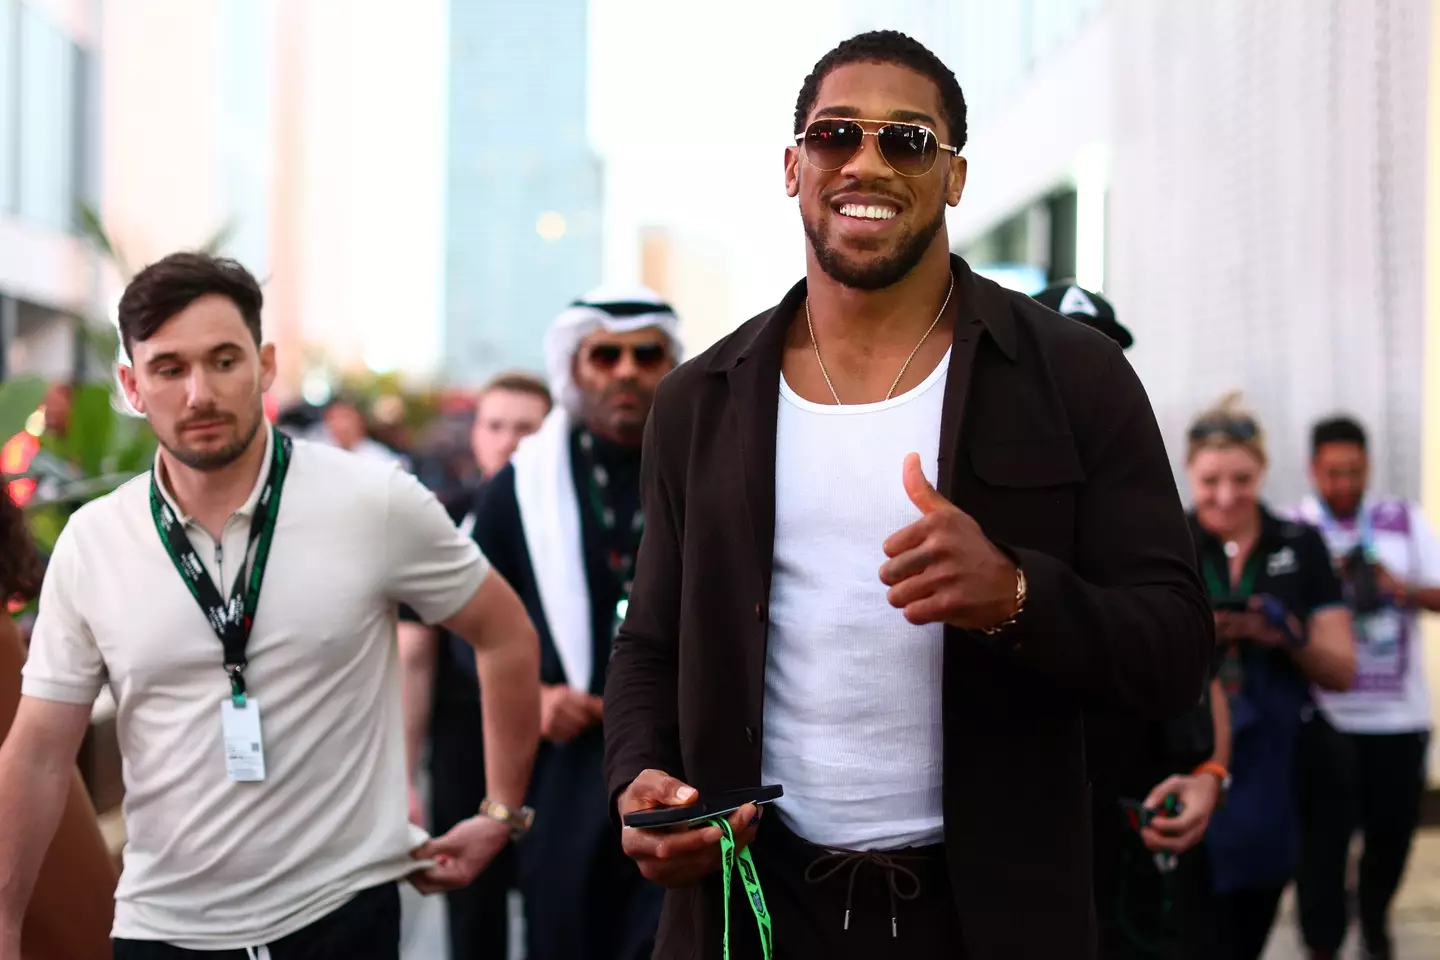 Anthony Joshua was at the F1 following his fight with Francis Ngannou last night (8 March).